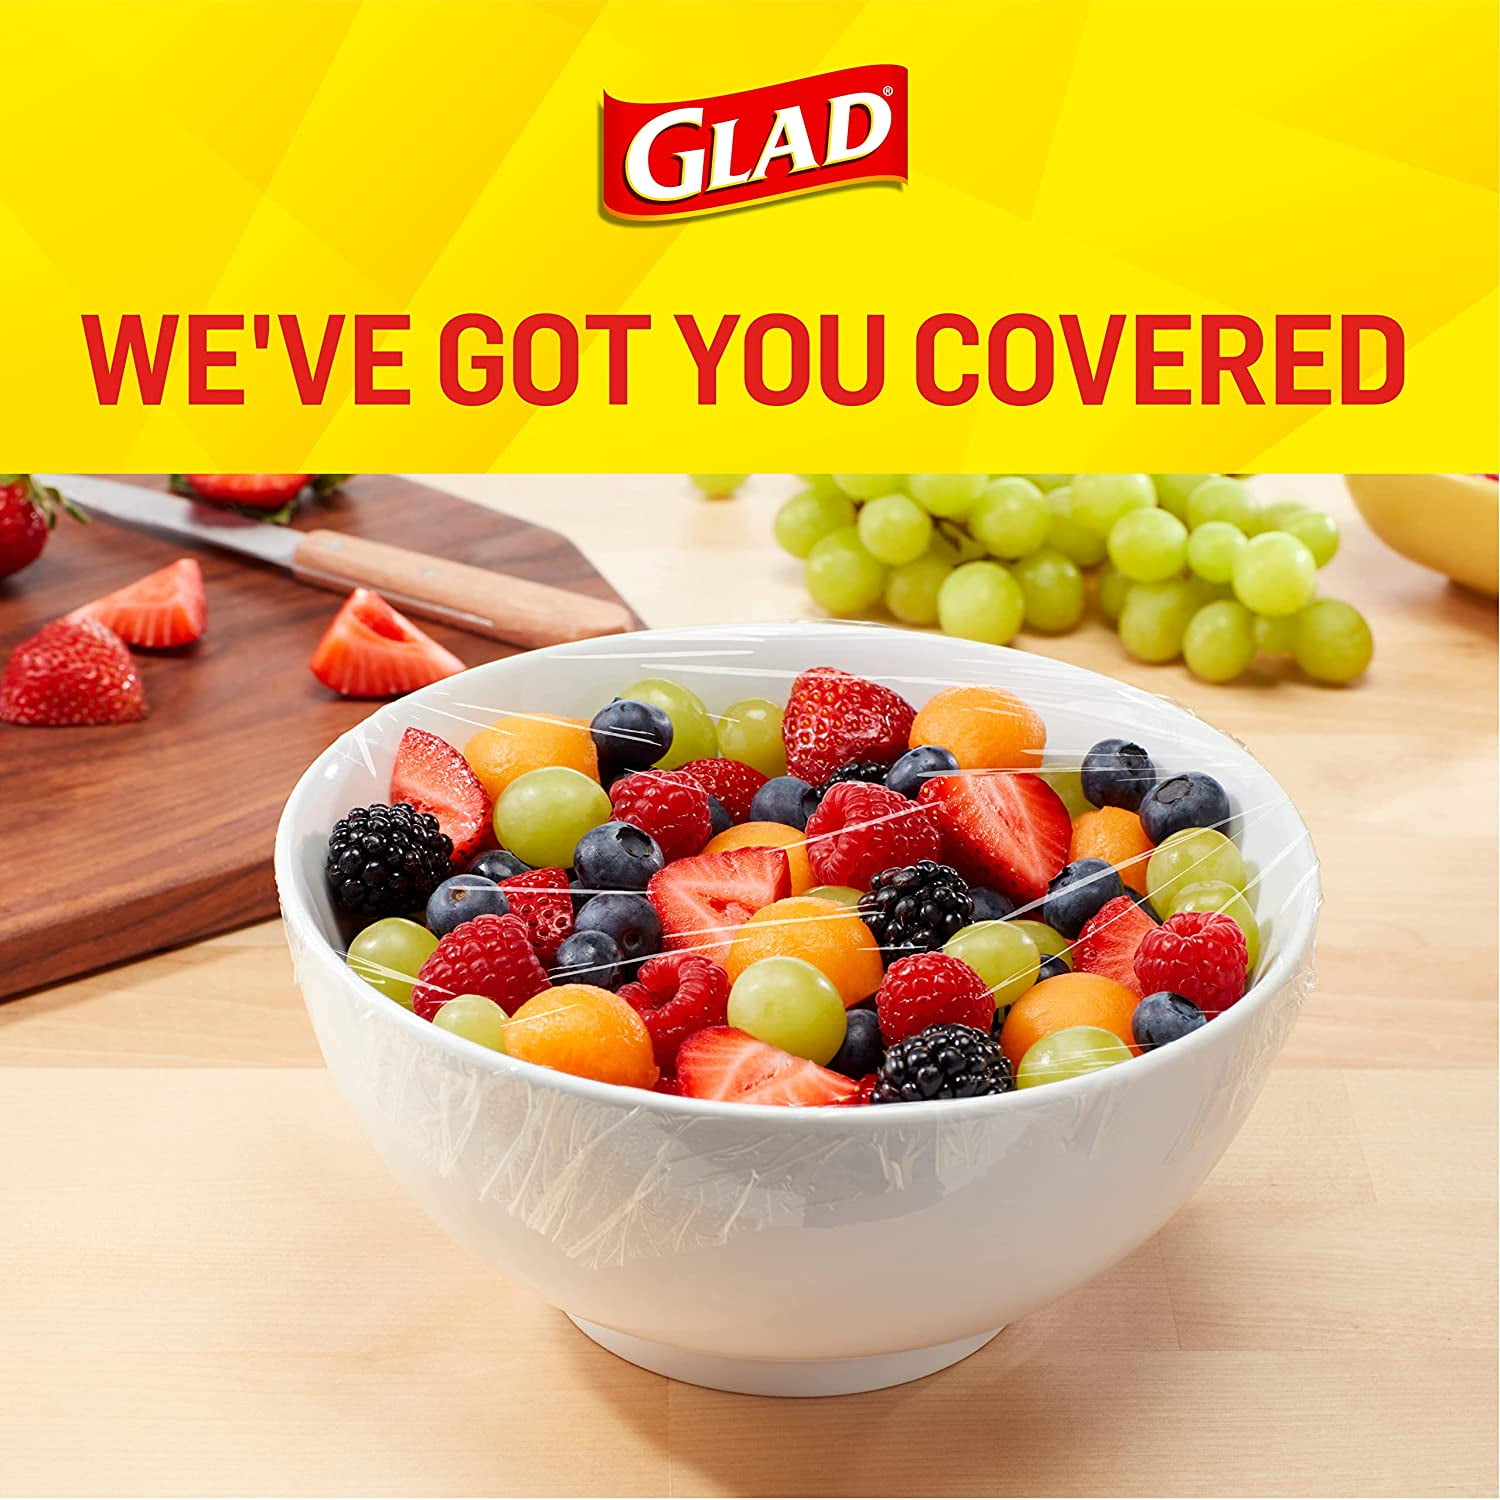 Glad Cling Wrap Plastic Wrap, 300 Square Foot Roll, Clear (00022EA)